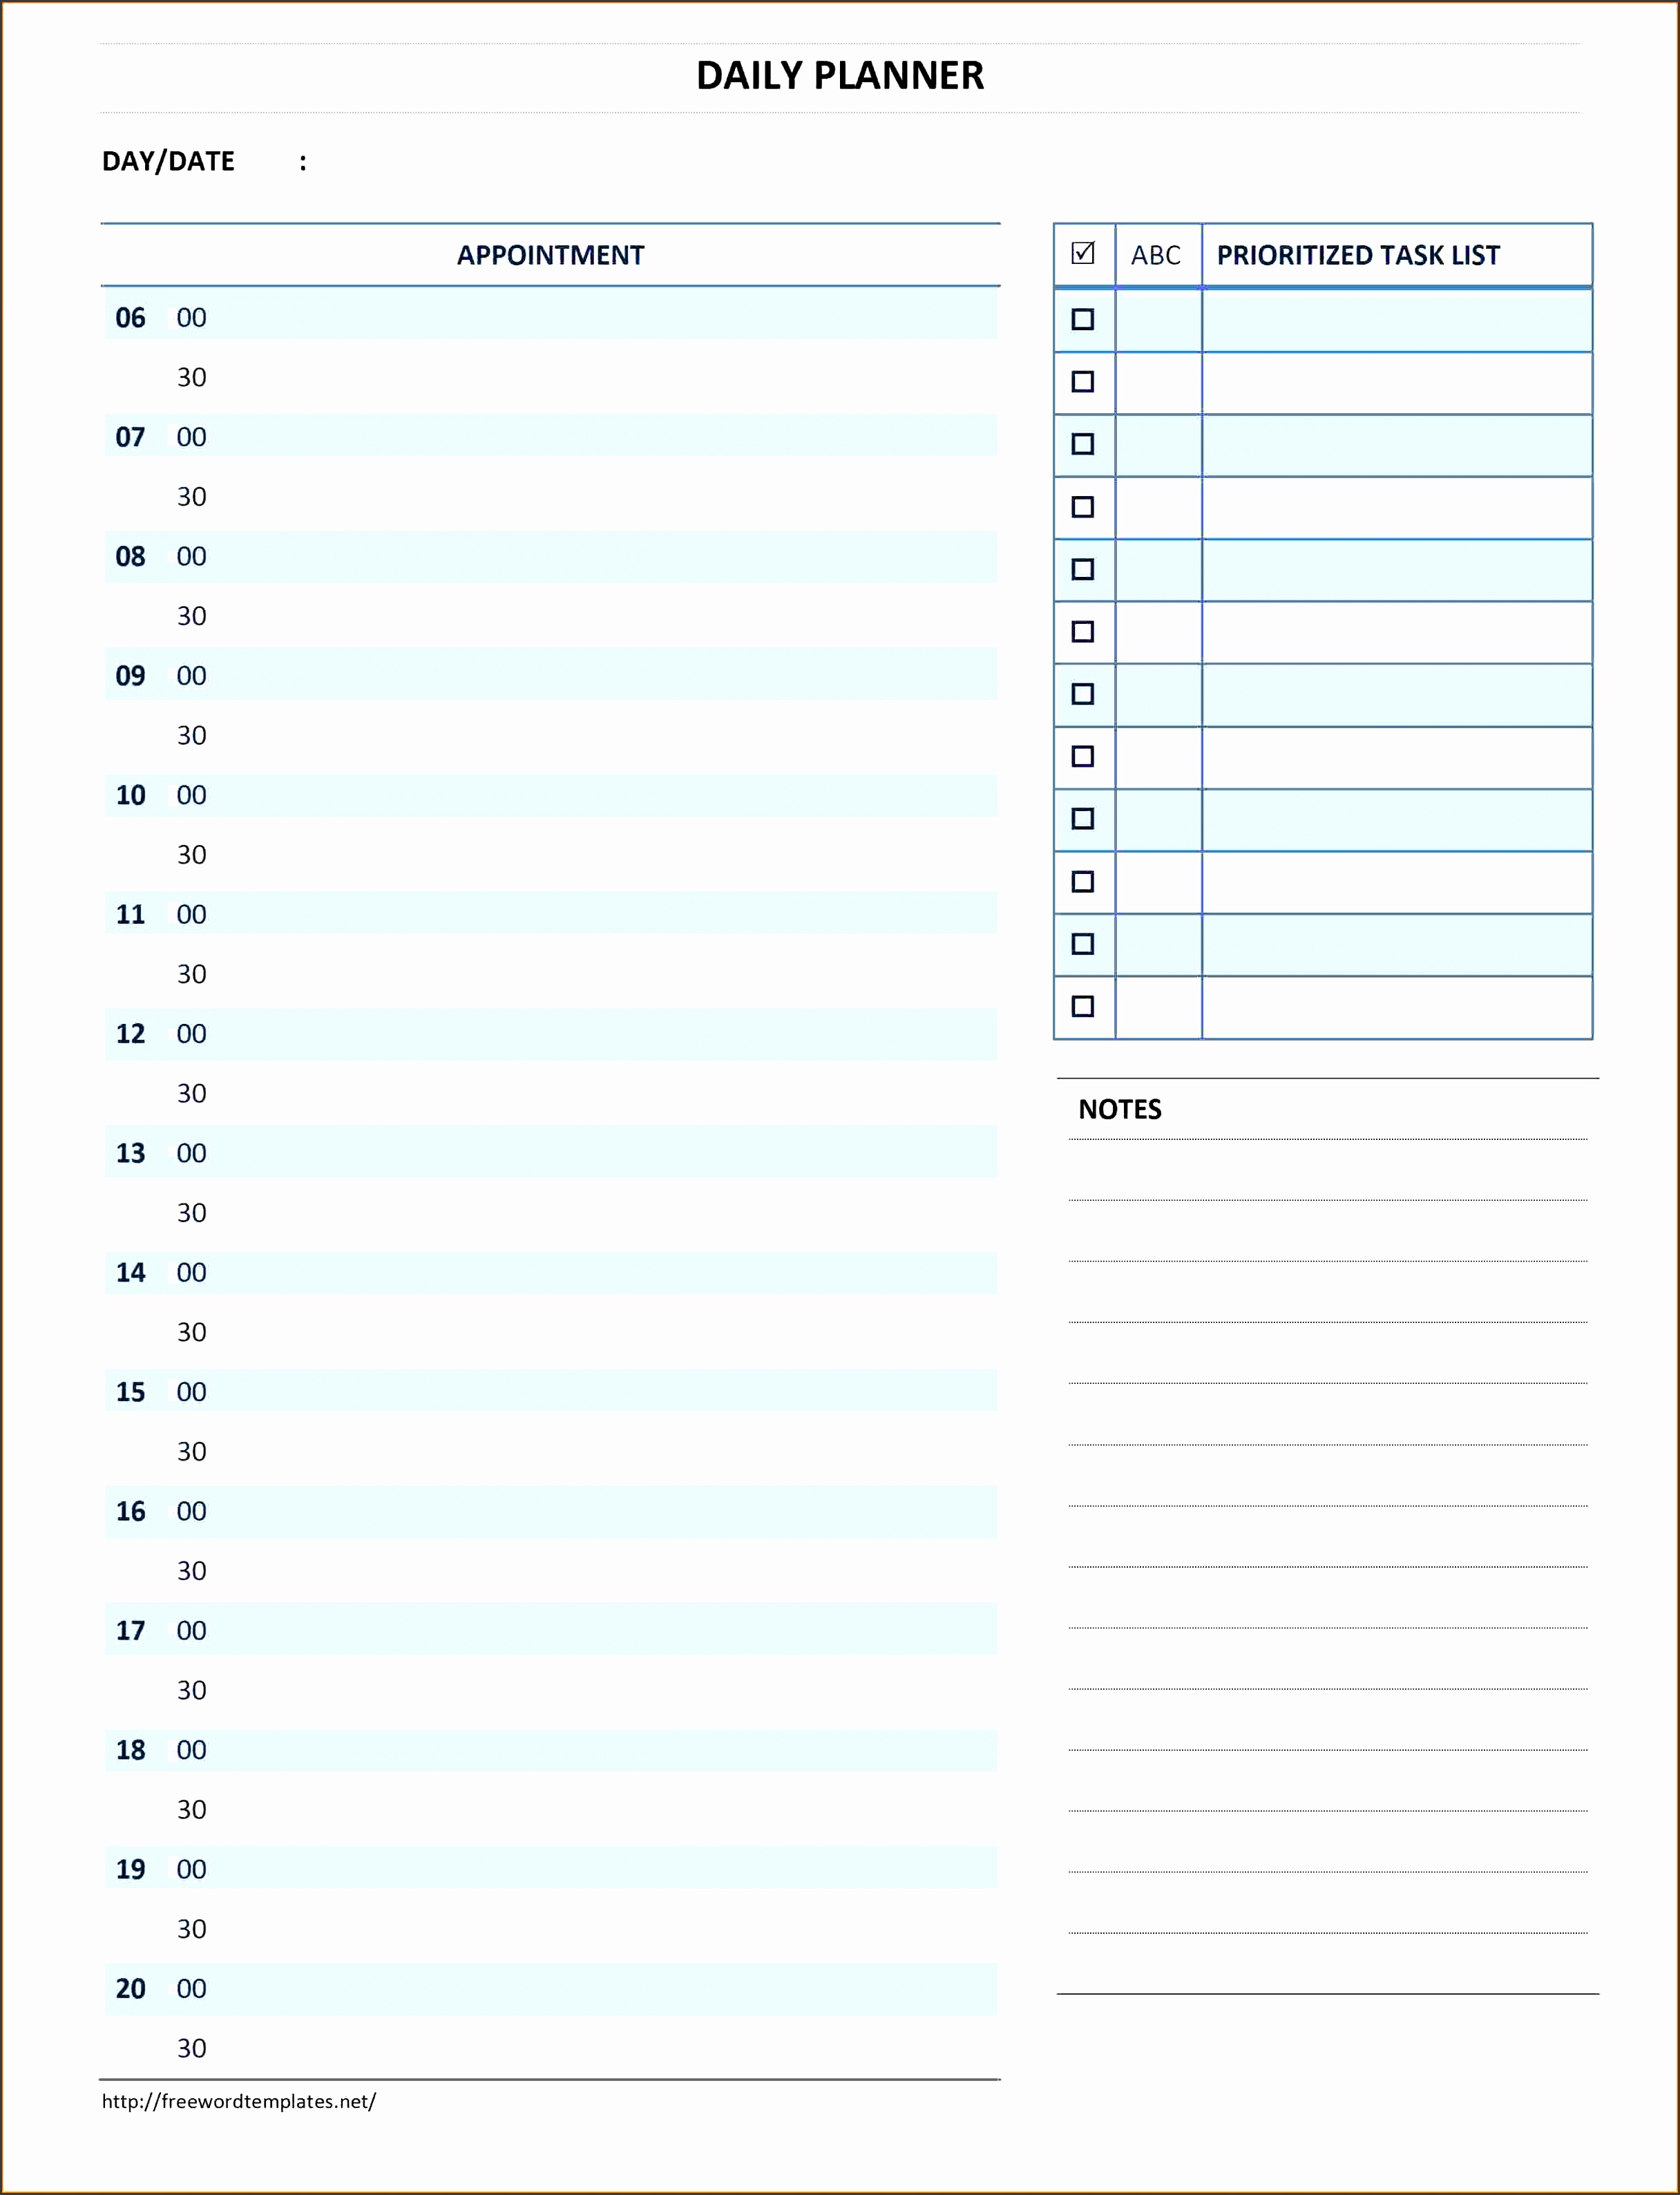 daily schedule template free formats excel word a free daily meal planner template to make your document professional and perfect